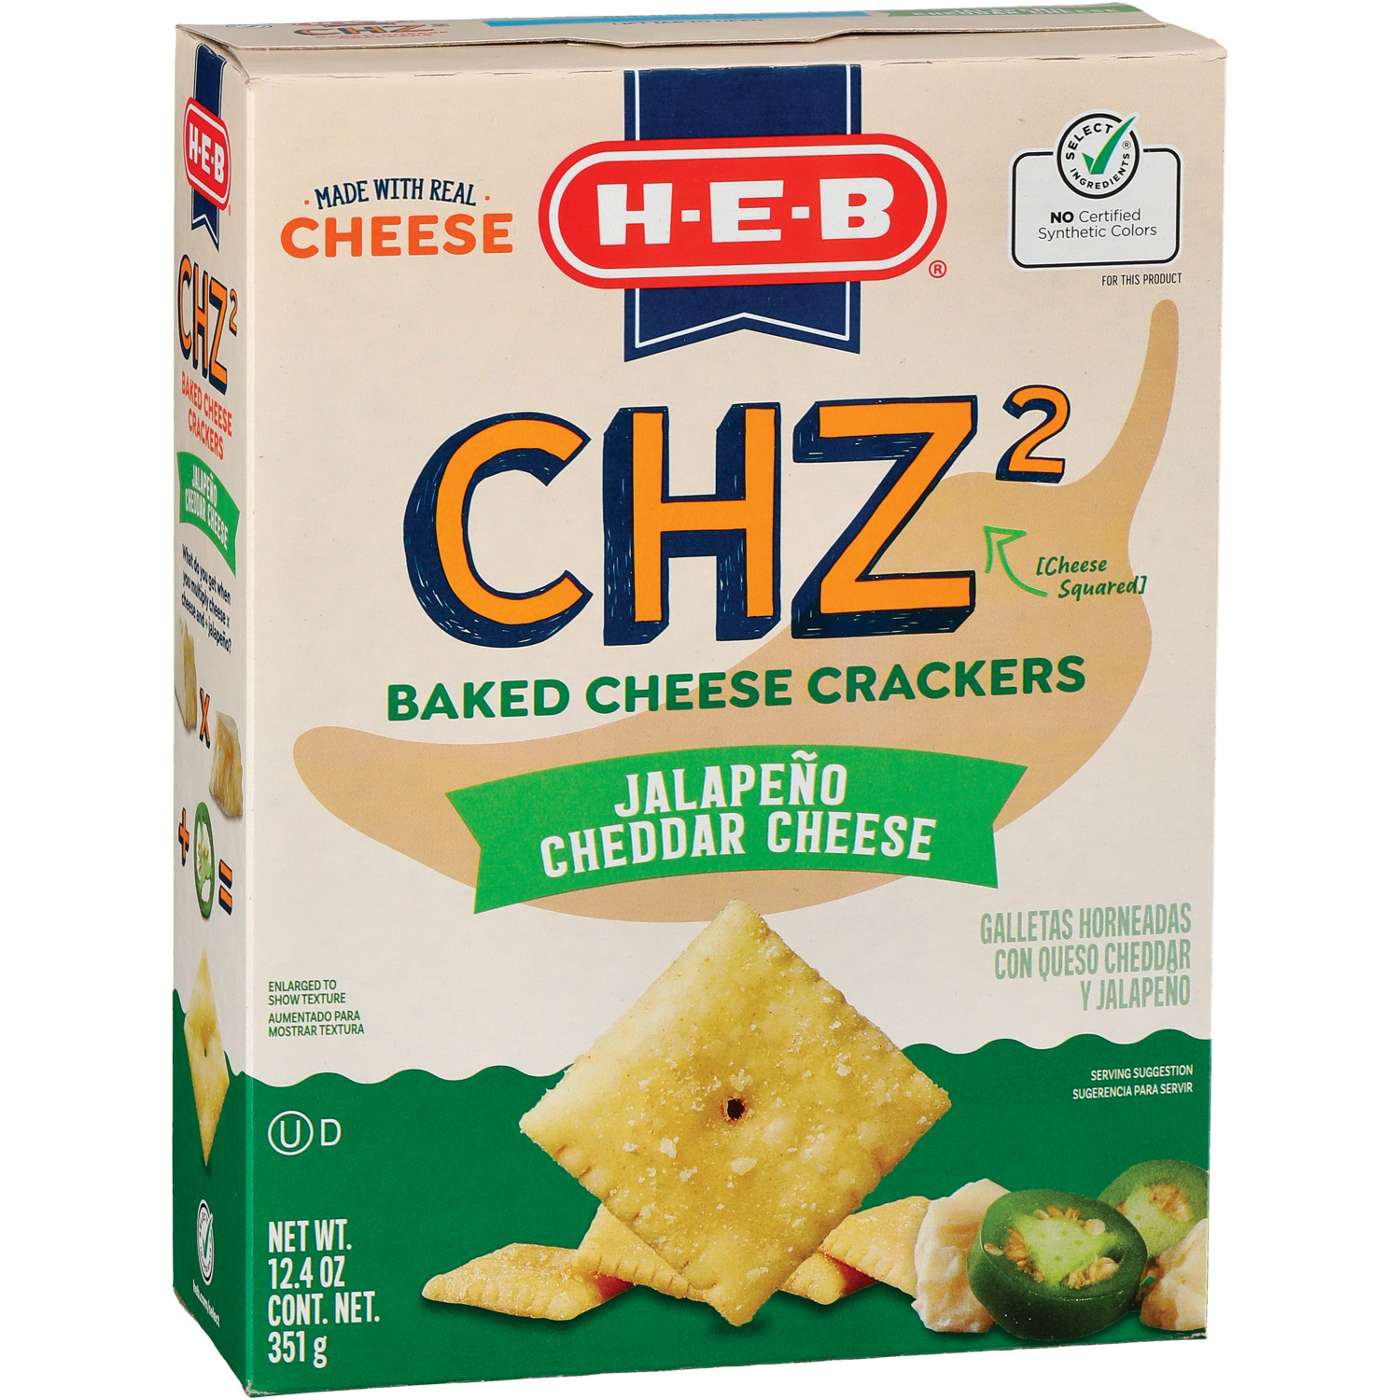 H-E-B CHZ2 Baked Cheese Crackers - Jalapeno Cheddar Cheese; image 2 of 2